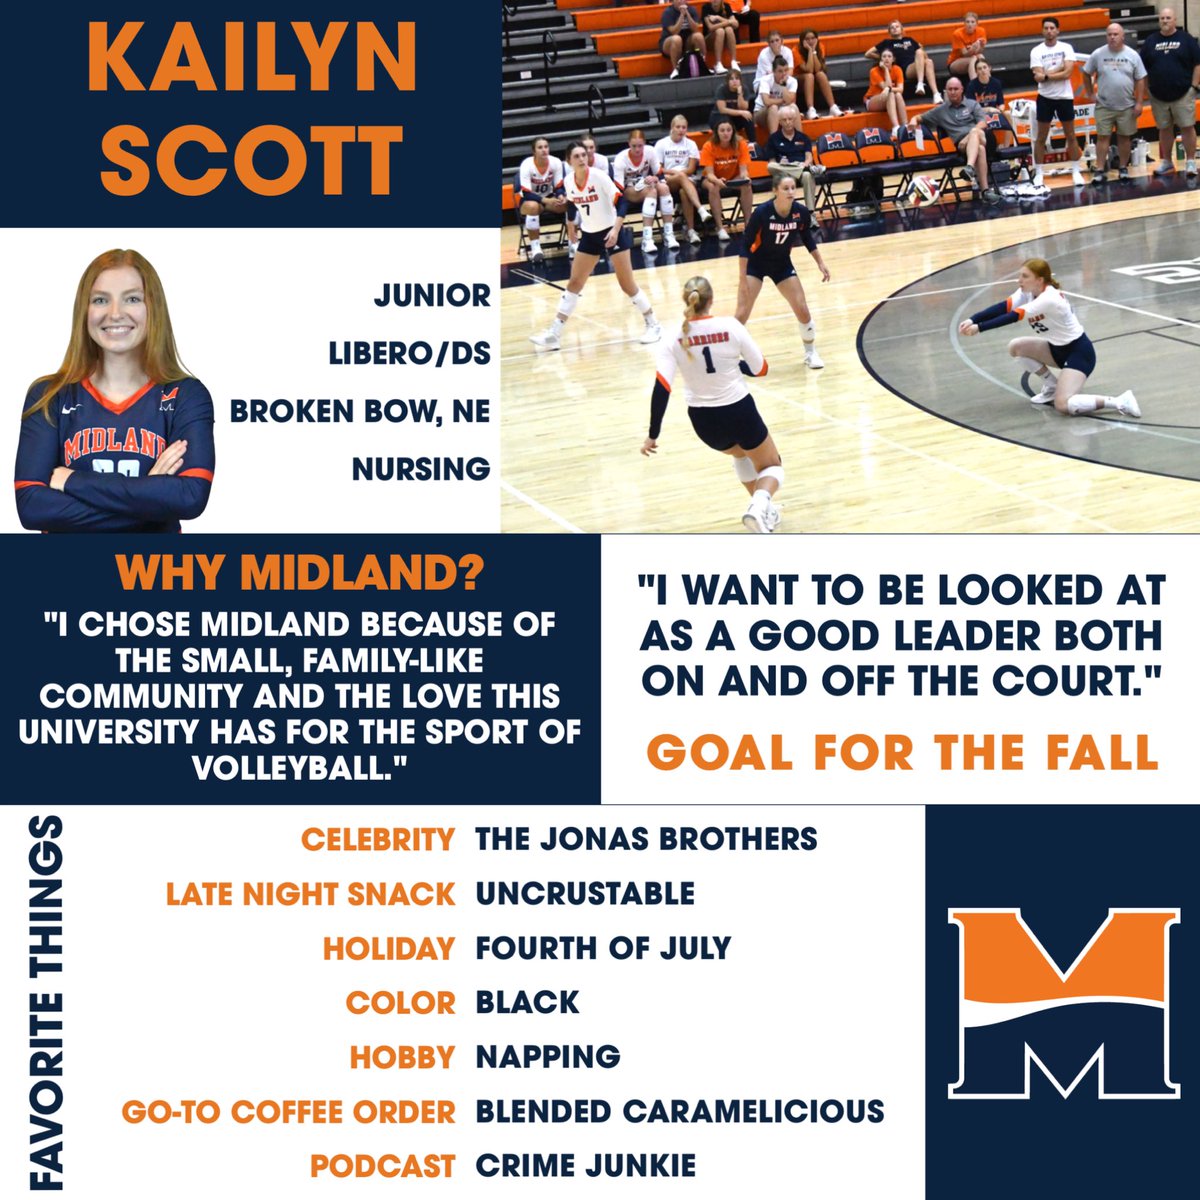 🌟 Warrior Spotlight 🌟 Get to know junior to-be defensive specialist Kailyn Scott, who was a 2023 NAIA Scholar-Athlete. Fun fact about Kailyn: She was an all-state setter at Broken Bow High School, but has since transitioned to a defensive role in college. Ballers ball. 💁‍♀️